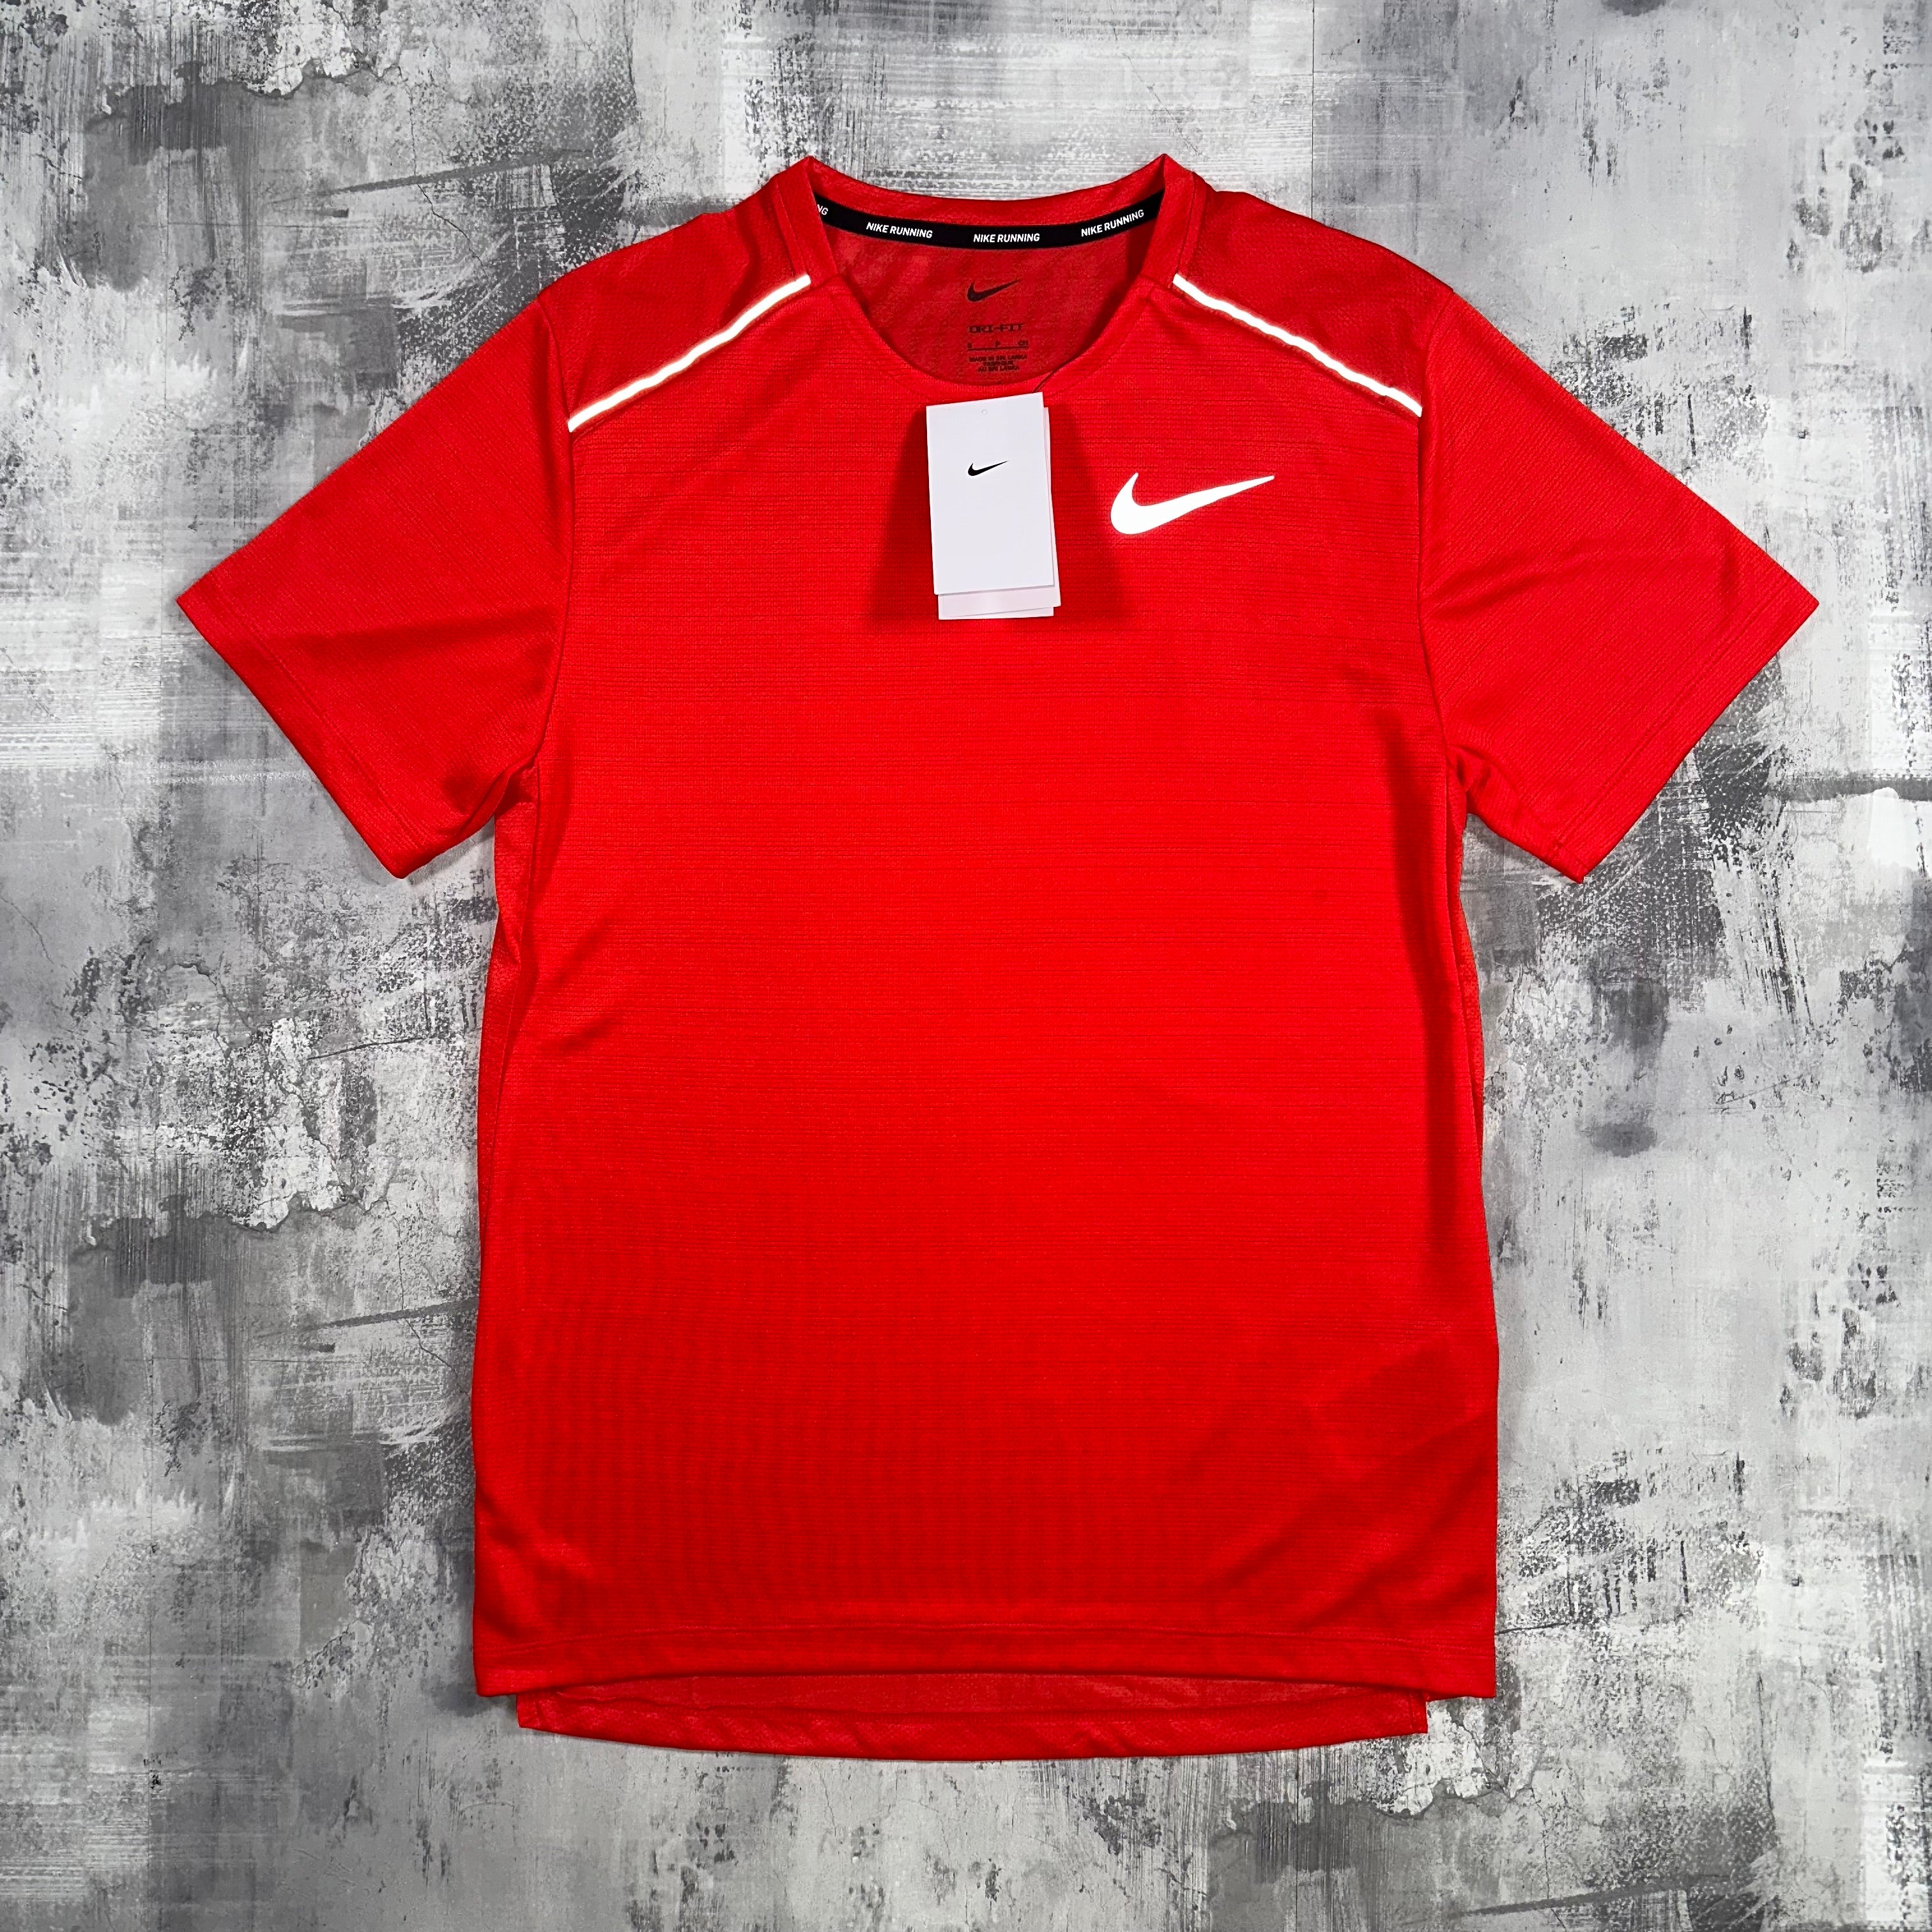 The Nike Miler T-Shirt in Red. In this angle you can see the signature Nike swoosh across the chest.